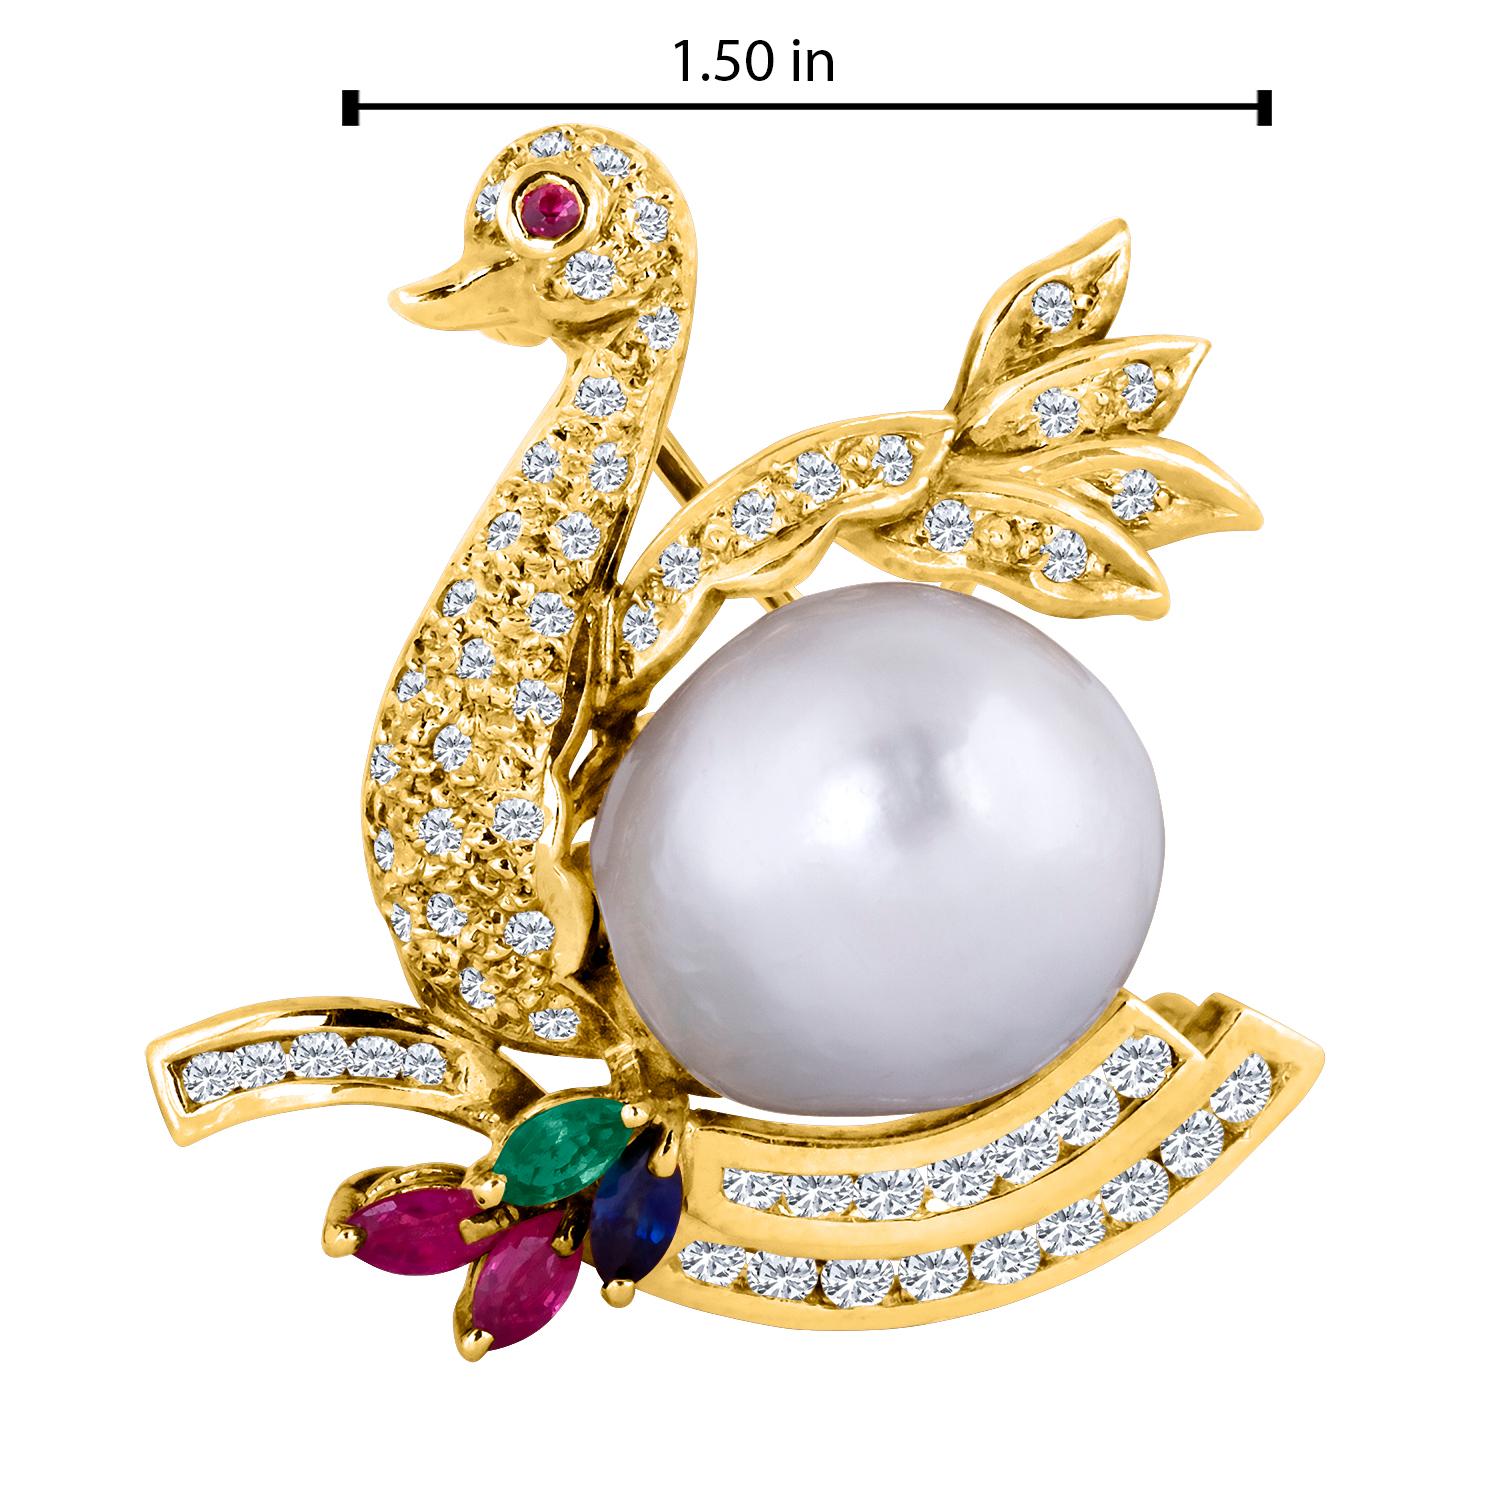 Modern 18 Karat Yellow Gold Diamond Swan Brooch with a South Sea Pearl Belly For Sale